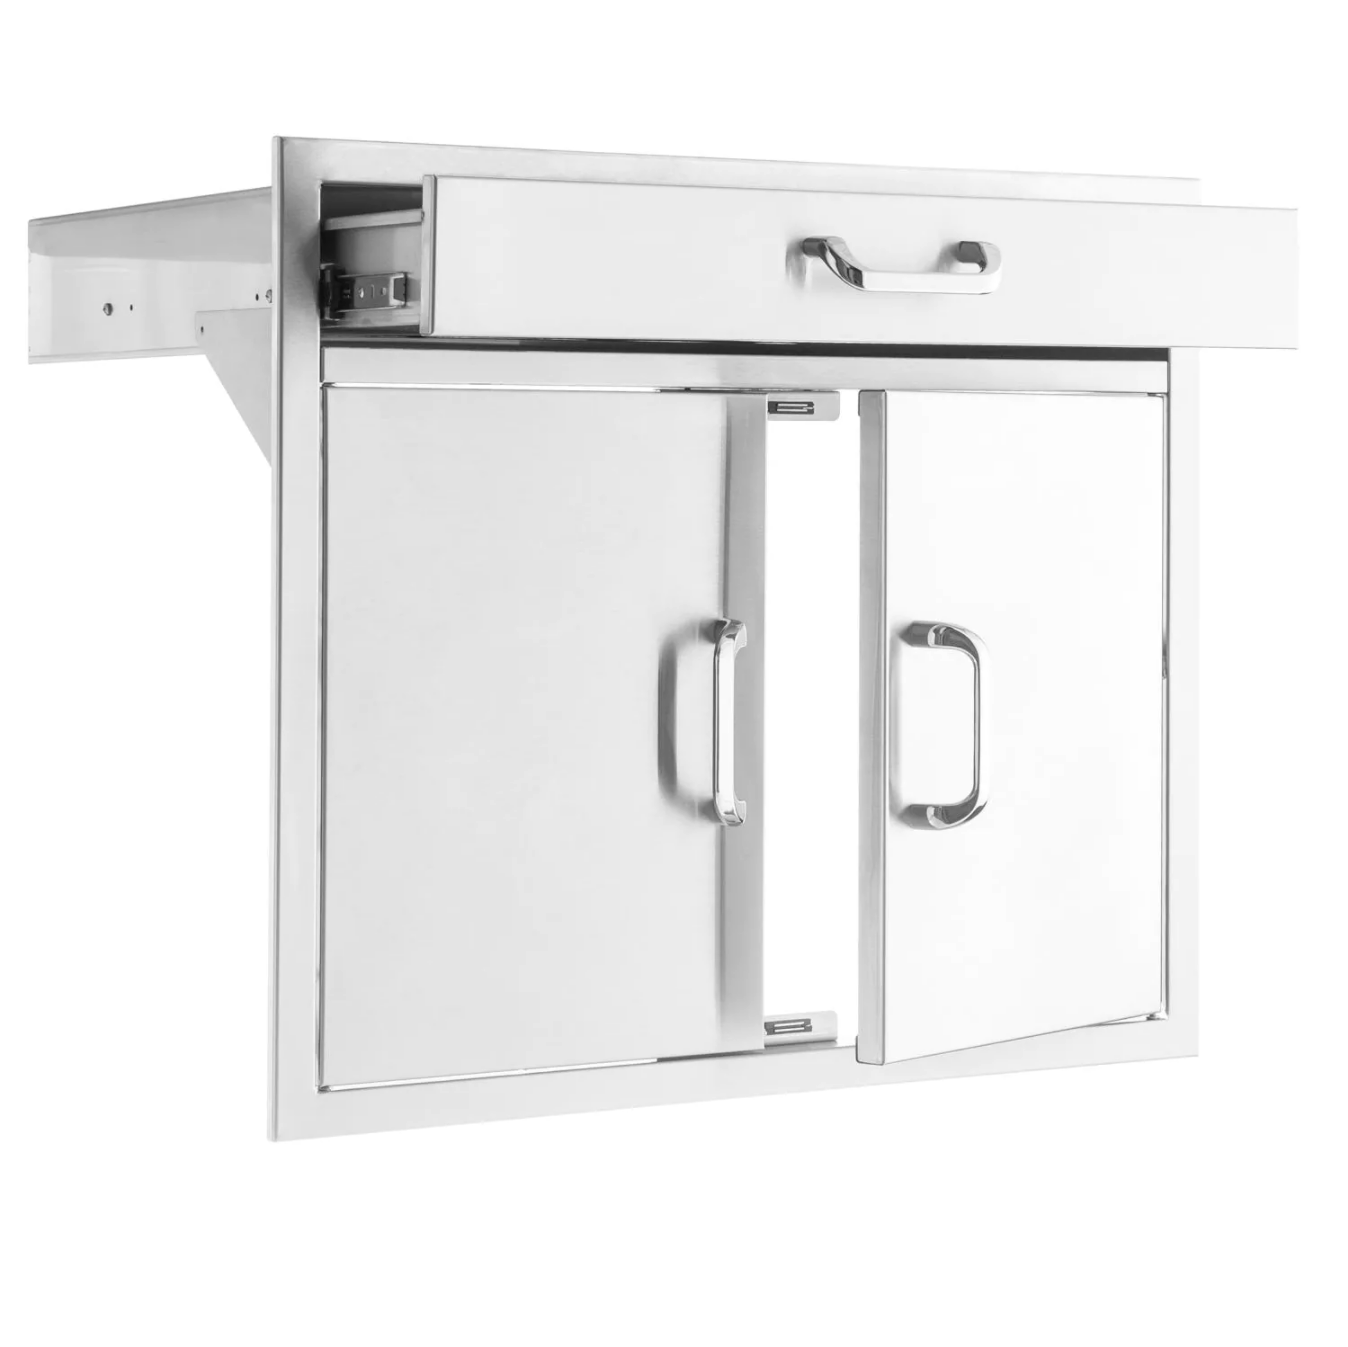 PCM 260 Series 30" Stainless Steel Double Door & Single Drawer Combo